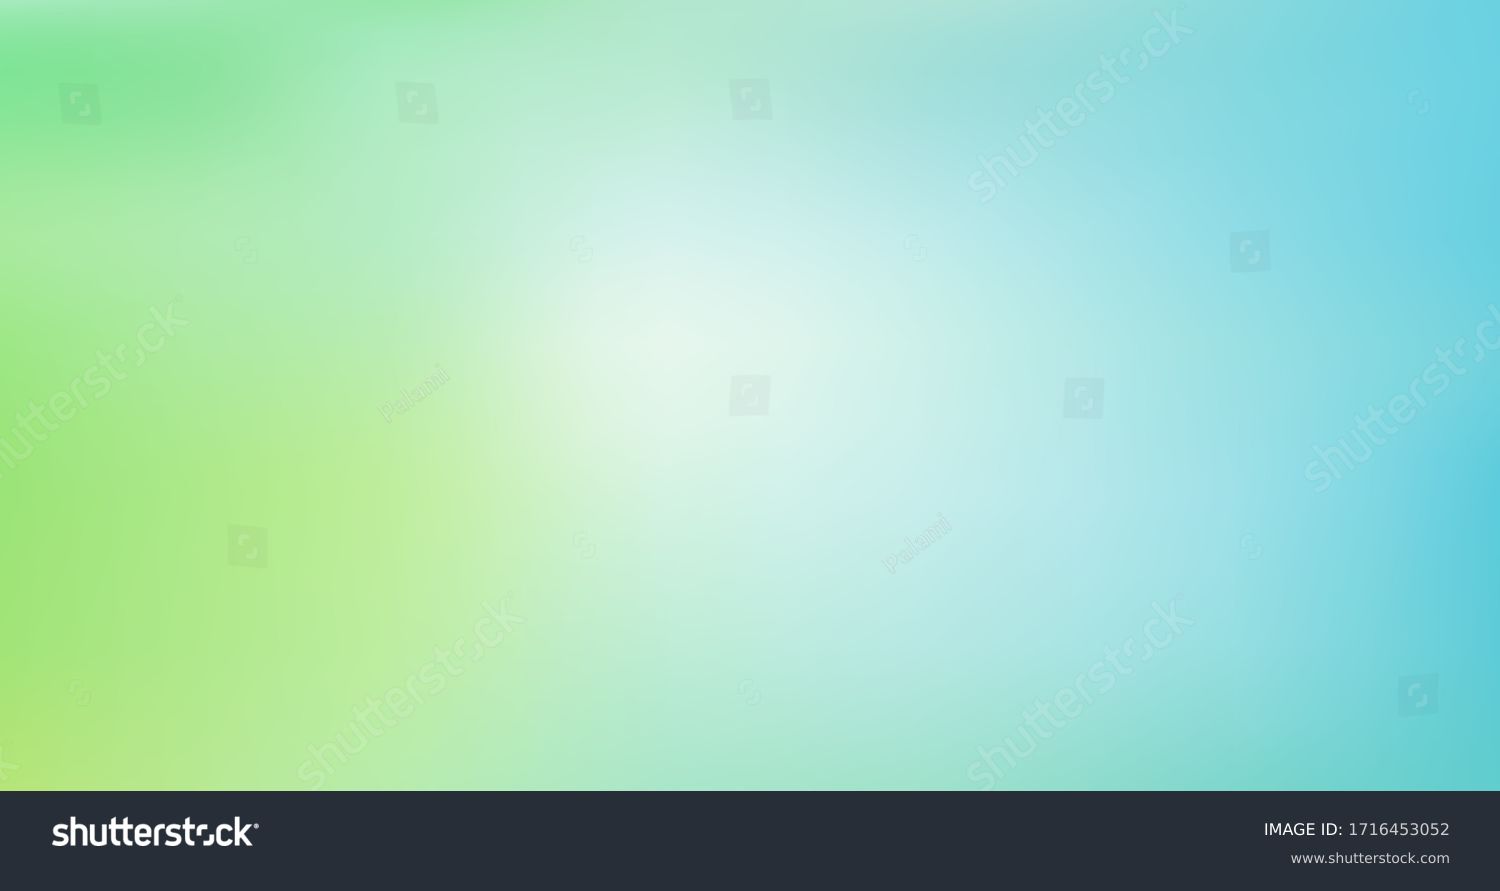 Light Blue, Green vector blurred background. Colorful illustration in abstract style with gradient. Elegant background for a brand book. Ecology concept for your graphic design, banner or poster #1716453052